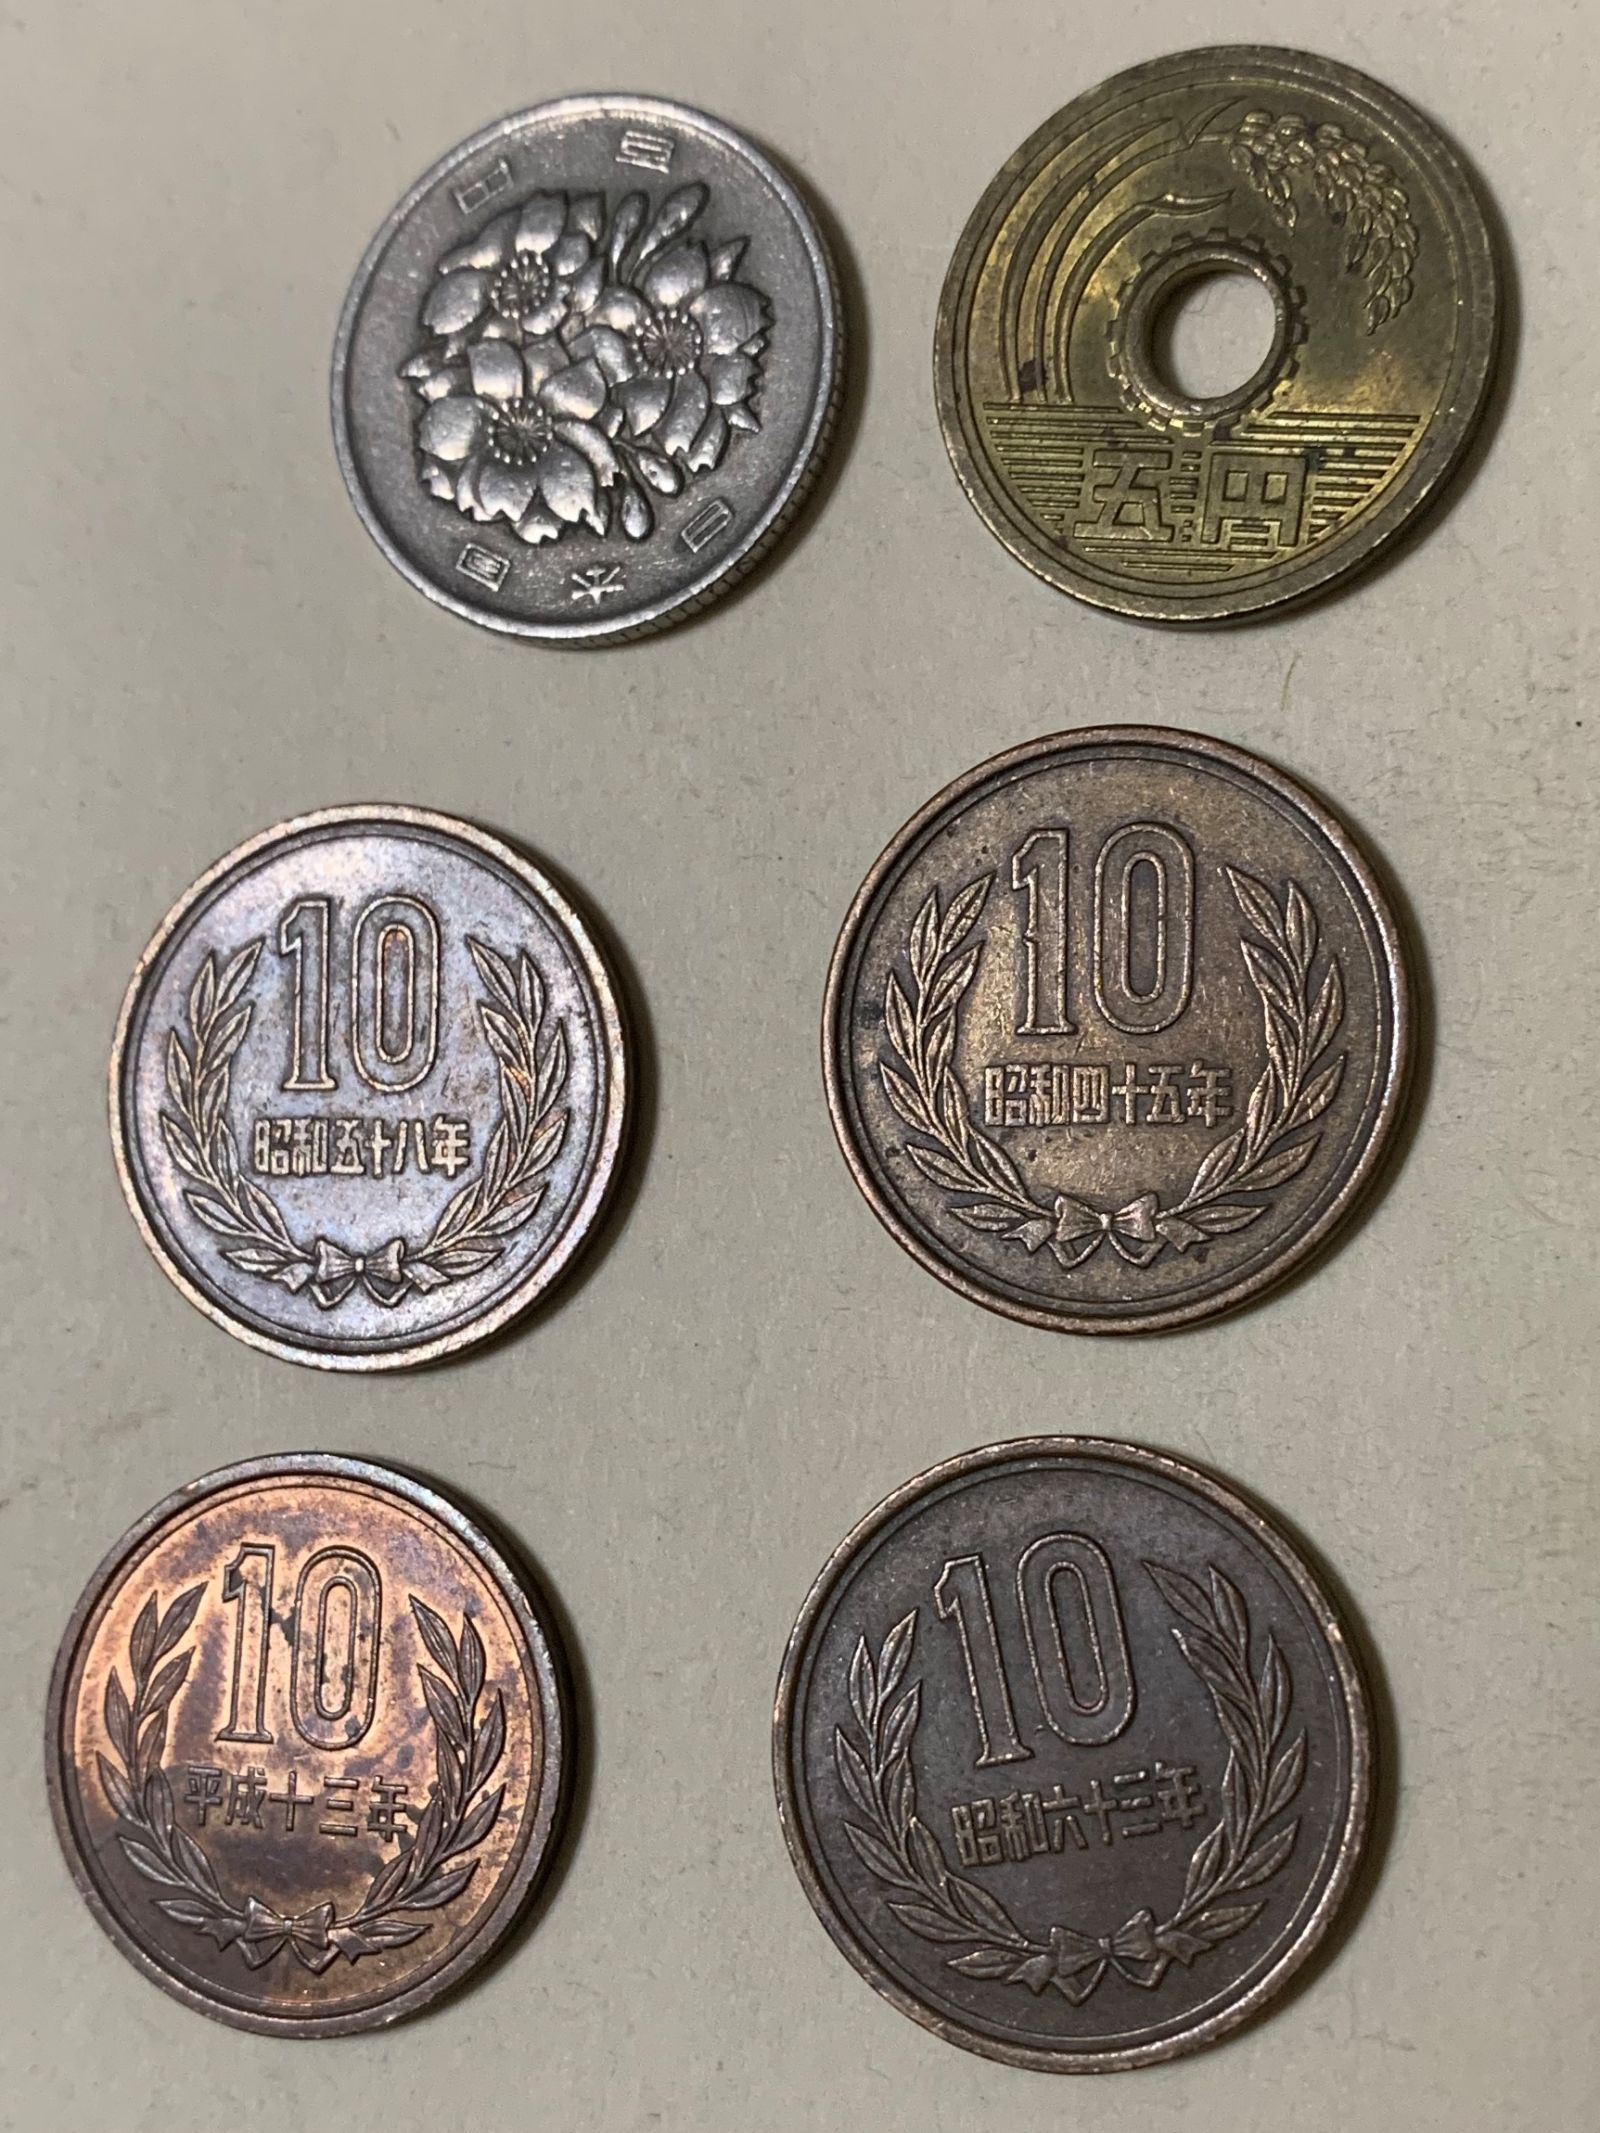 Illustration for article titled Can you tell me anything about these coins? Coworker found them in an old building.